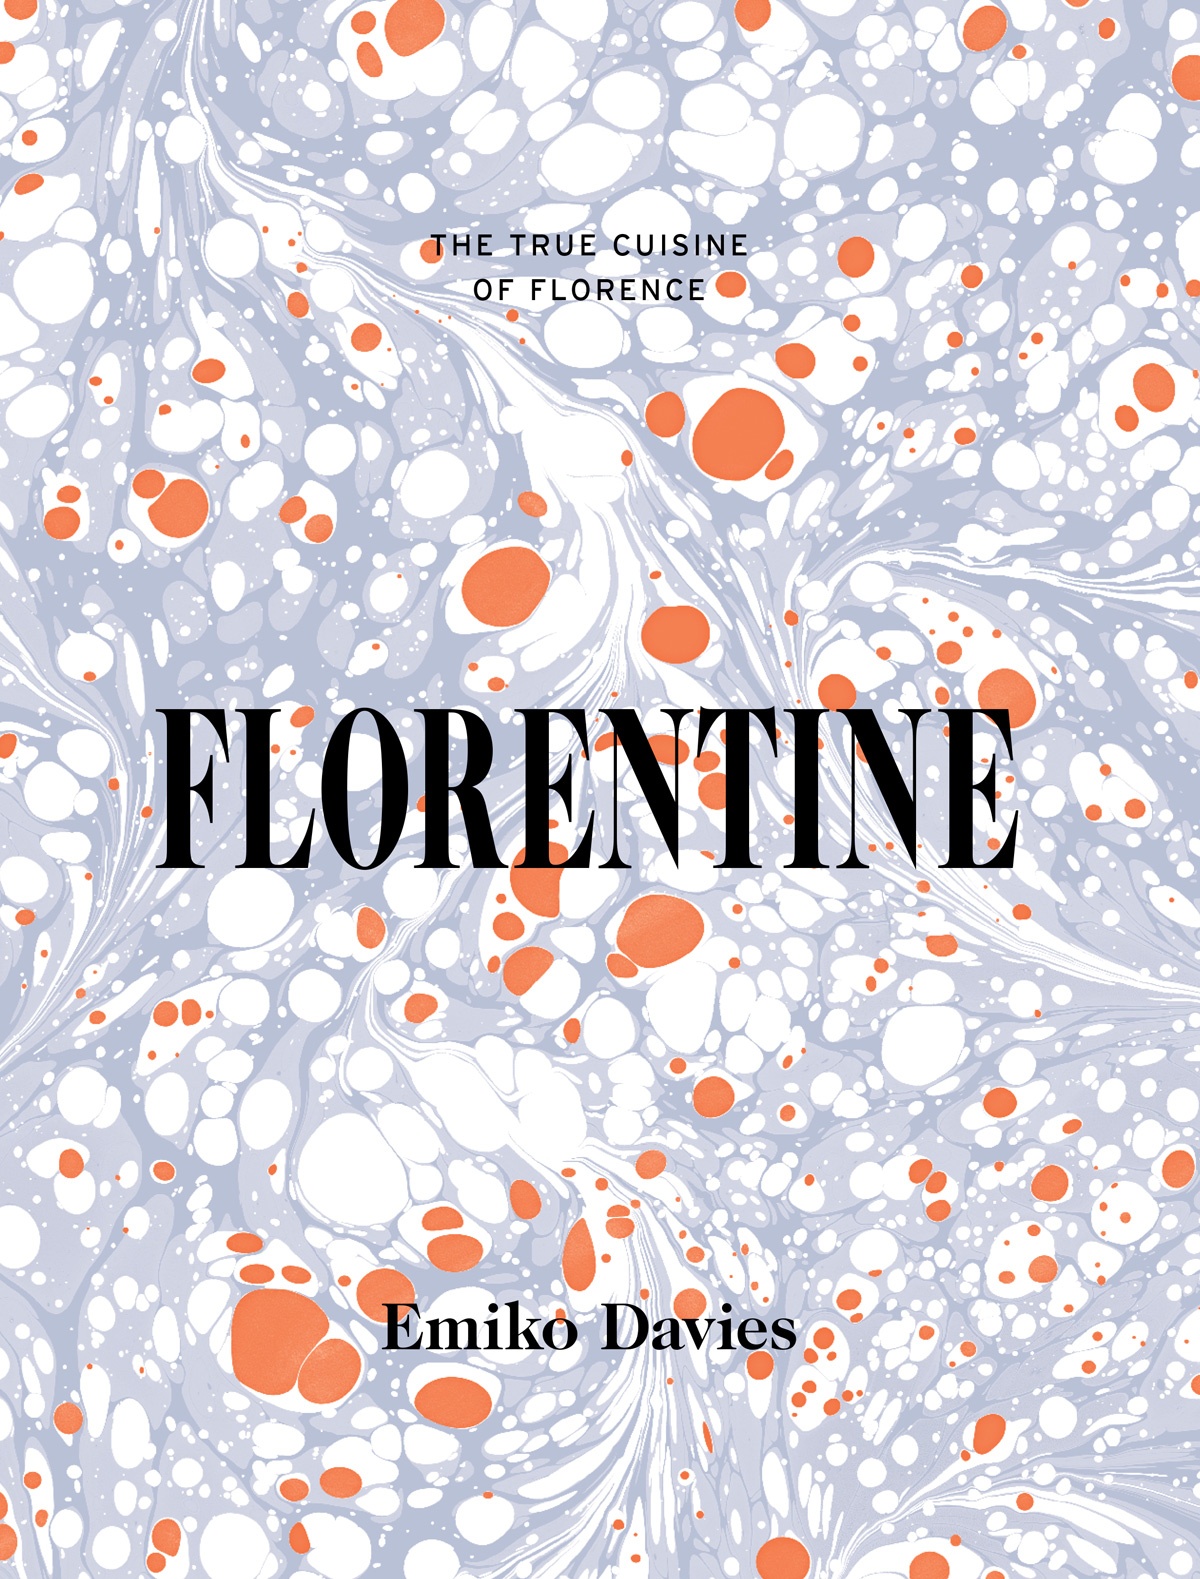 Book cover of Florentine by Emiko Davies